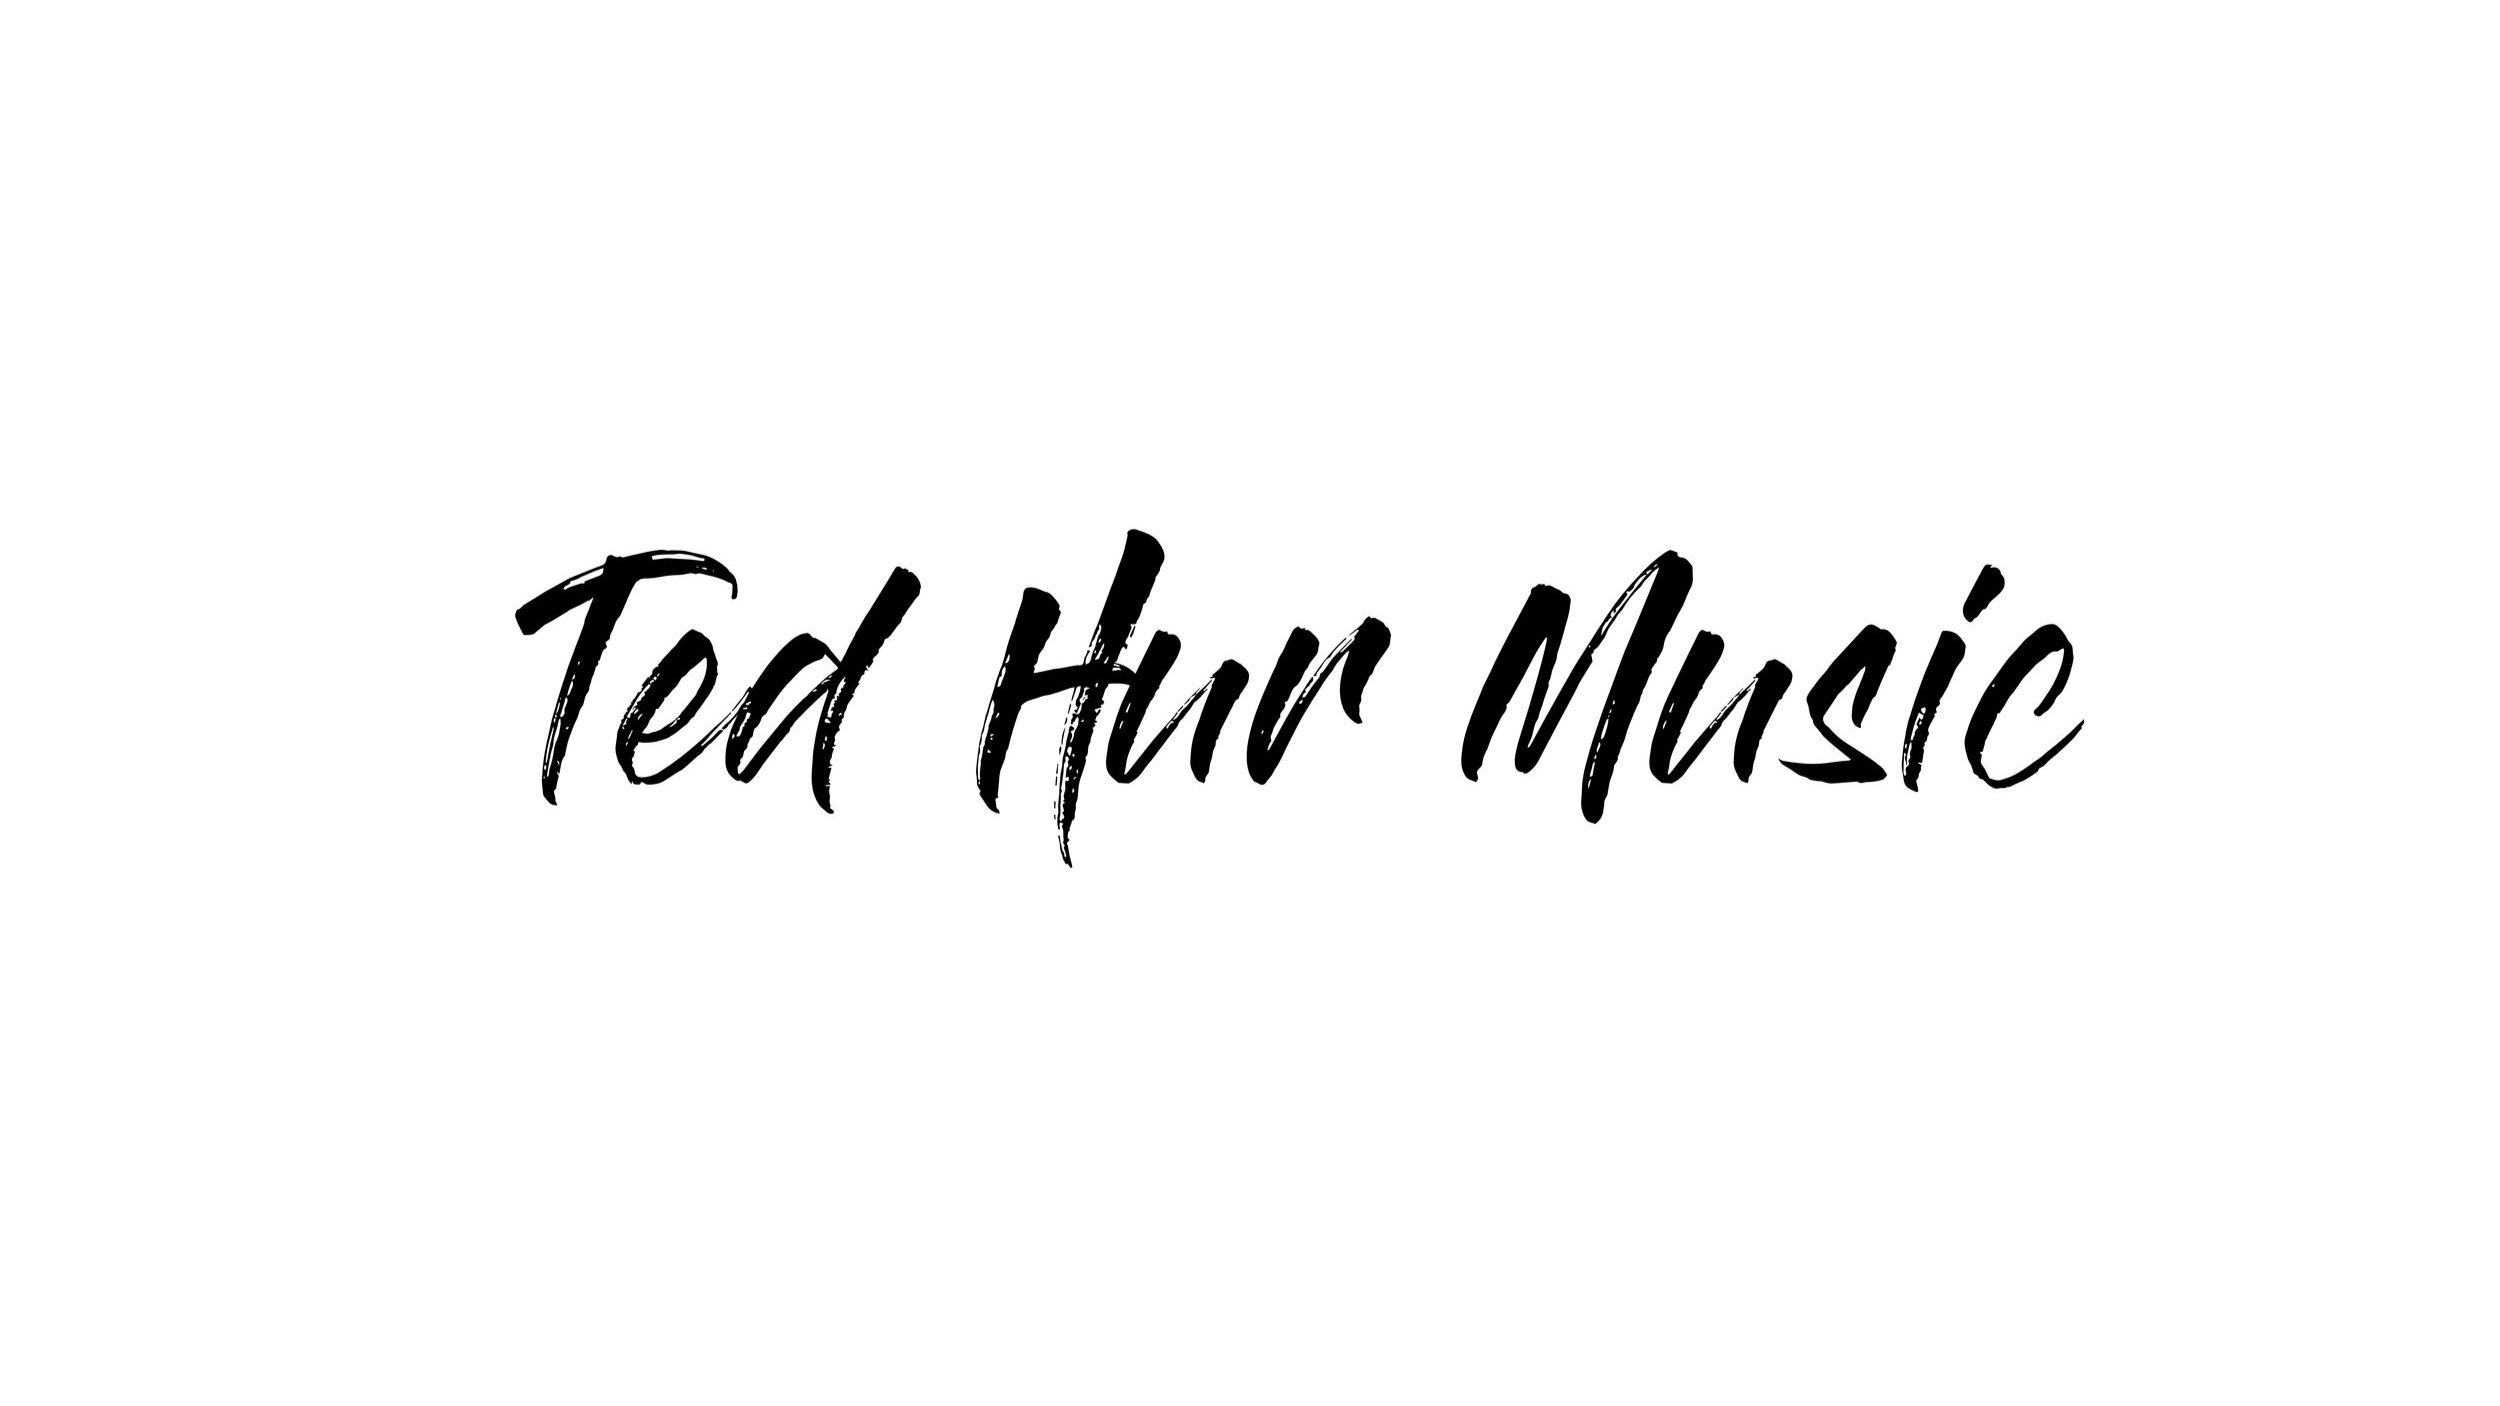 TED HUR